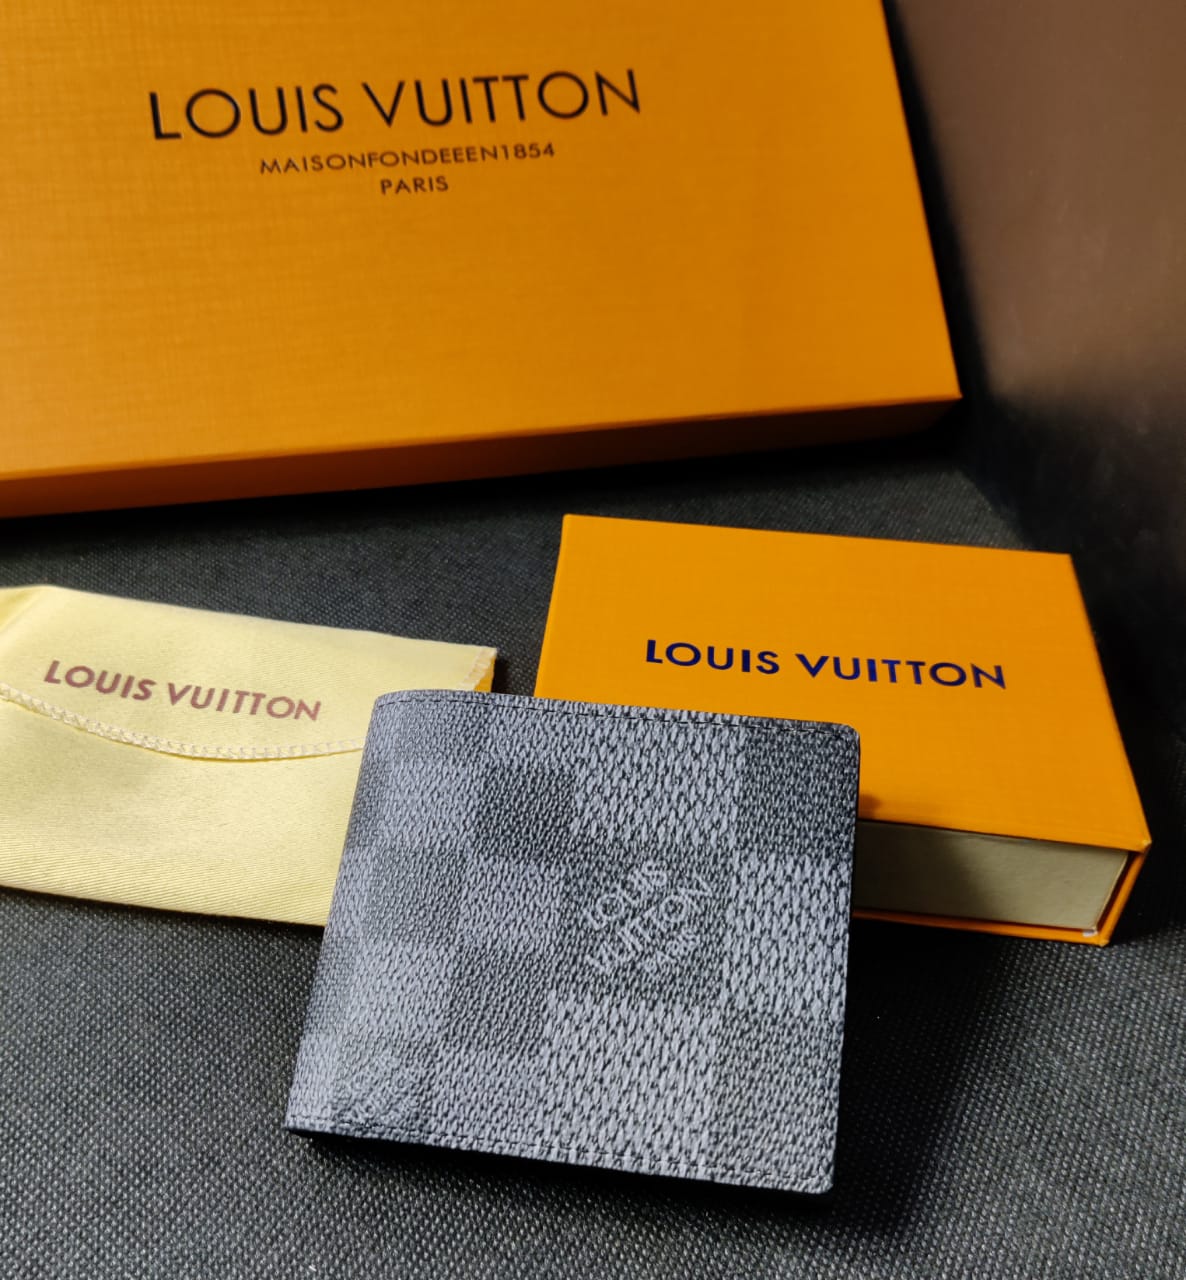 Louis Vuitton Leather Heavy quality latest full printed design wallet for men's LV-701